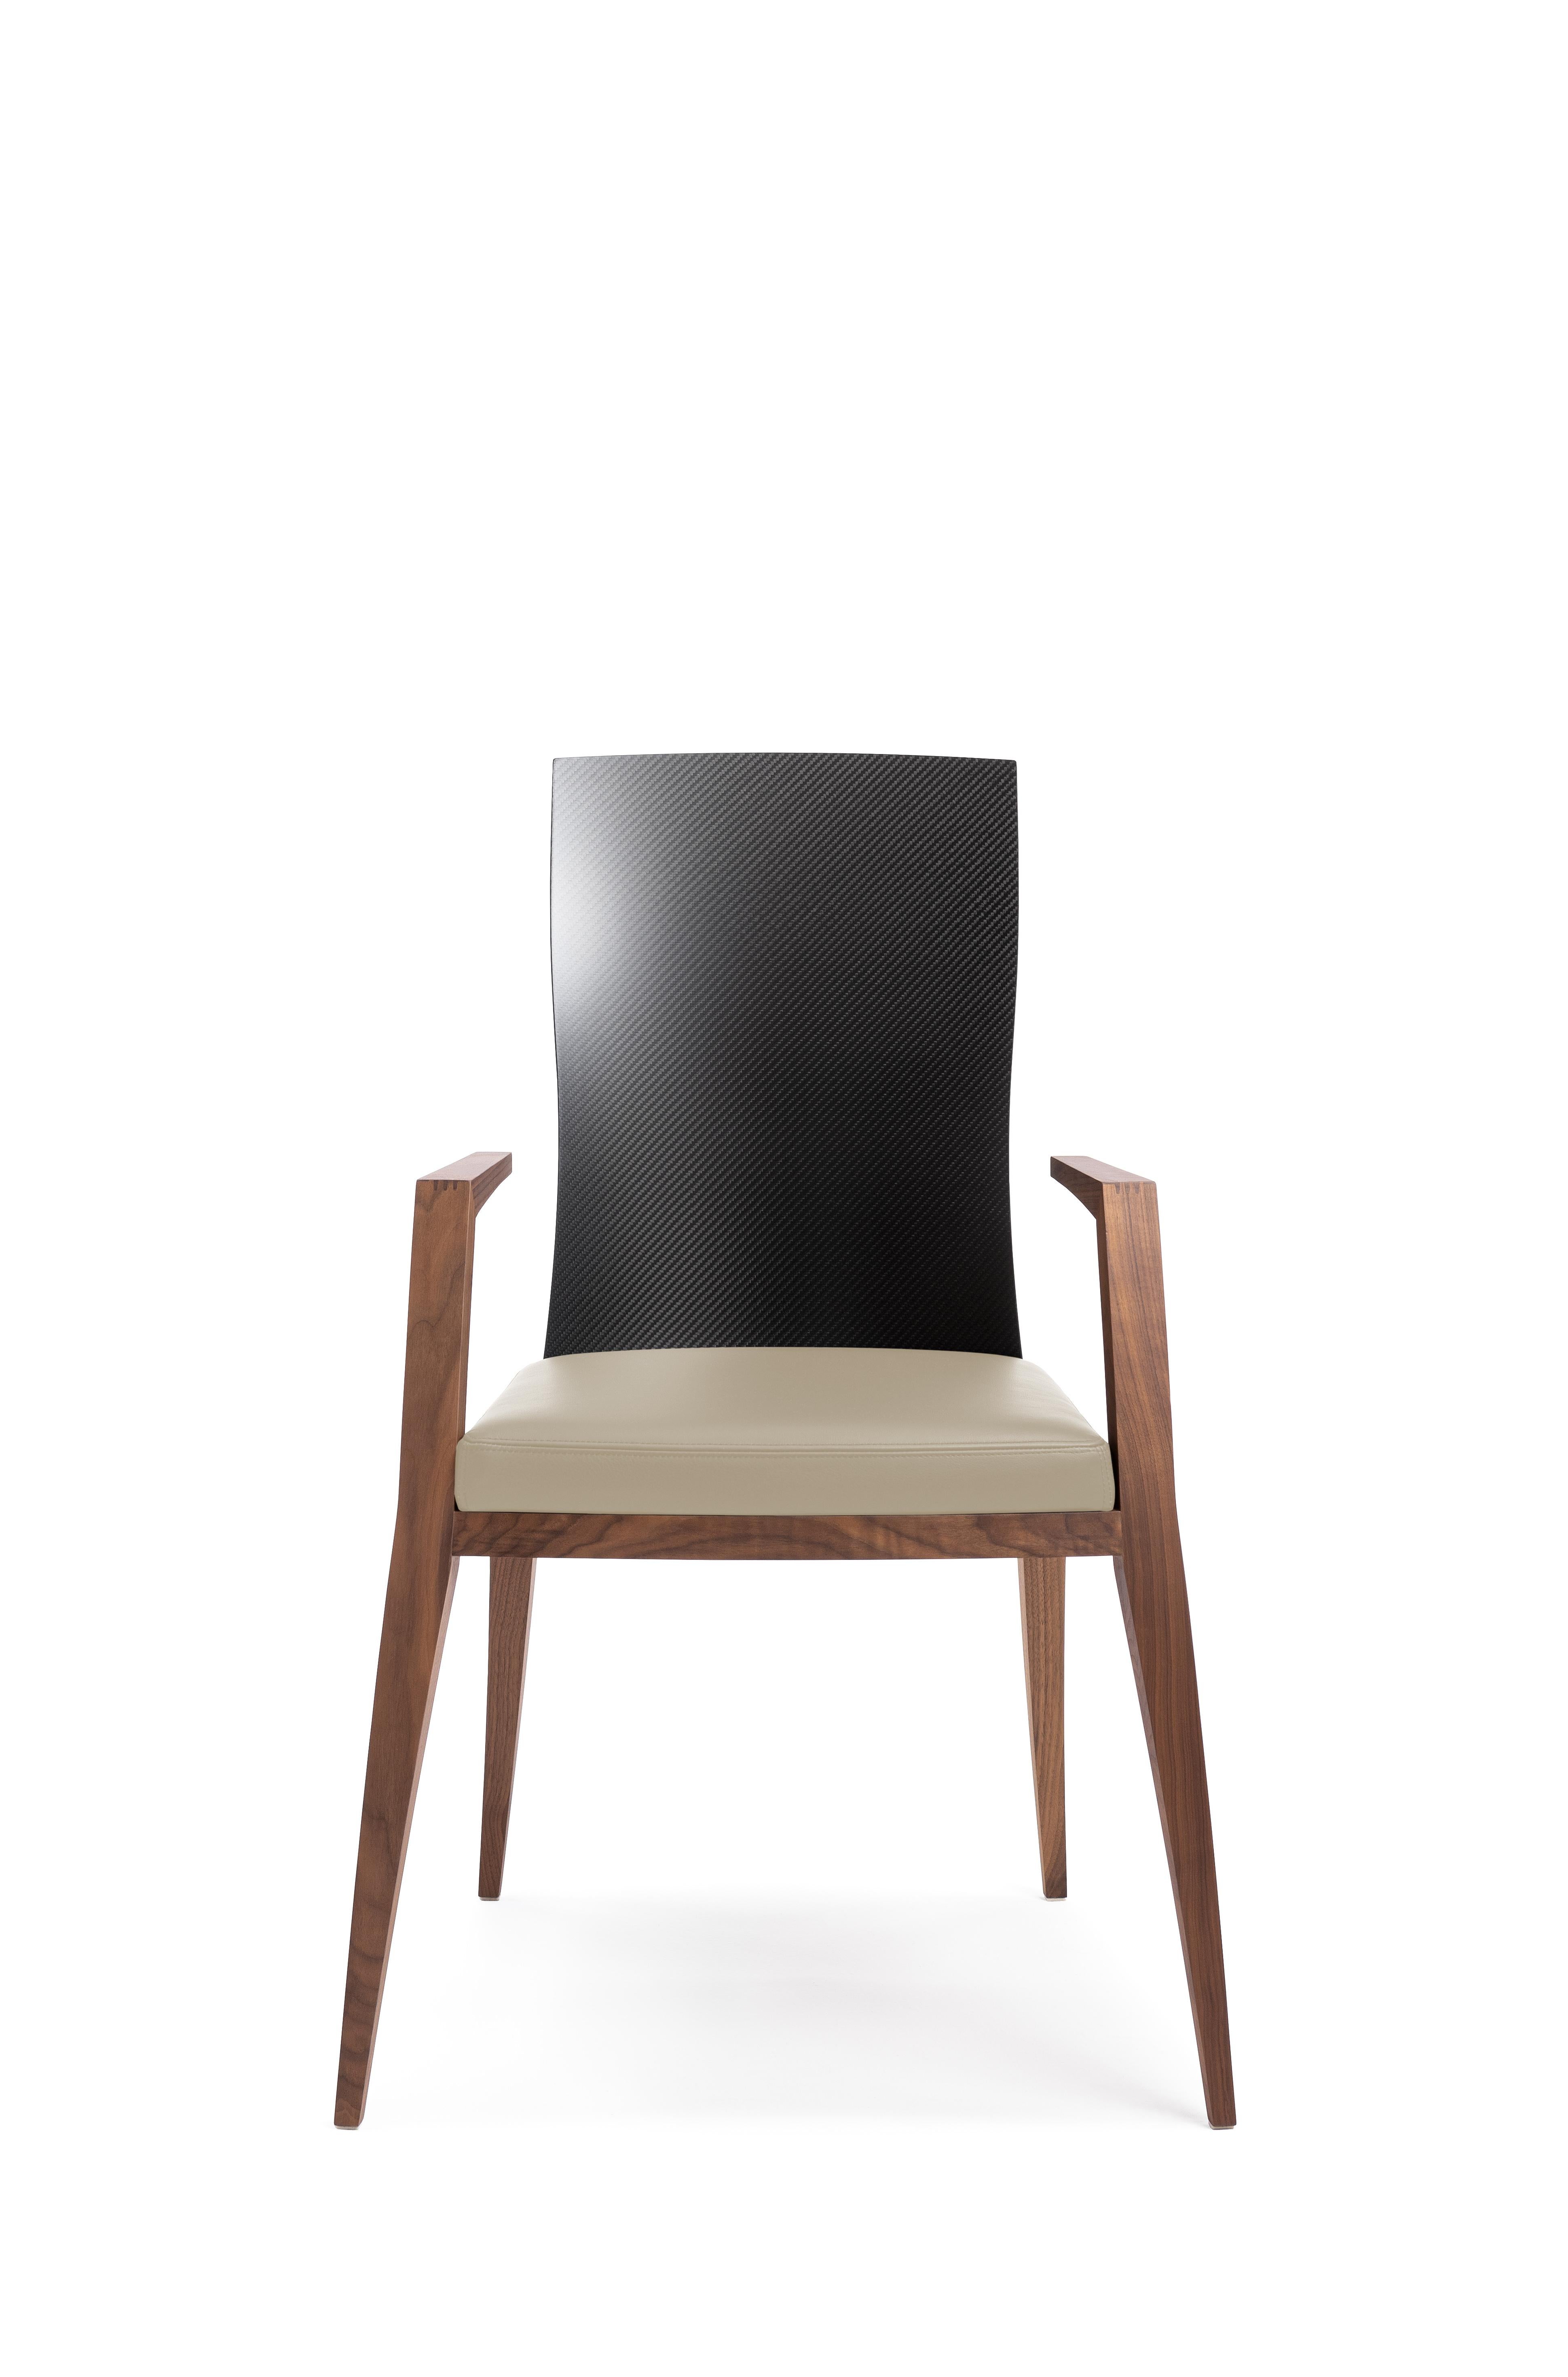 Italian Modern Design Chair with Armrests, Made in Canaletto Walnut and Carbon Fiber For Sale